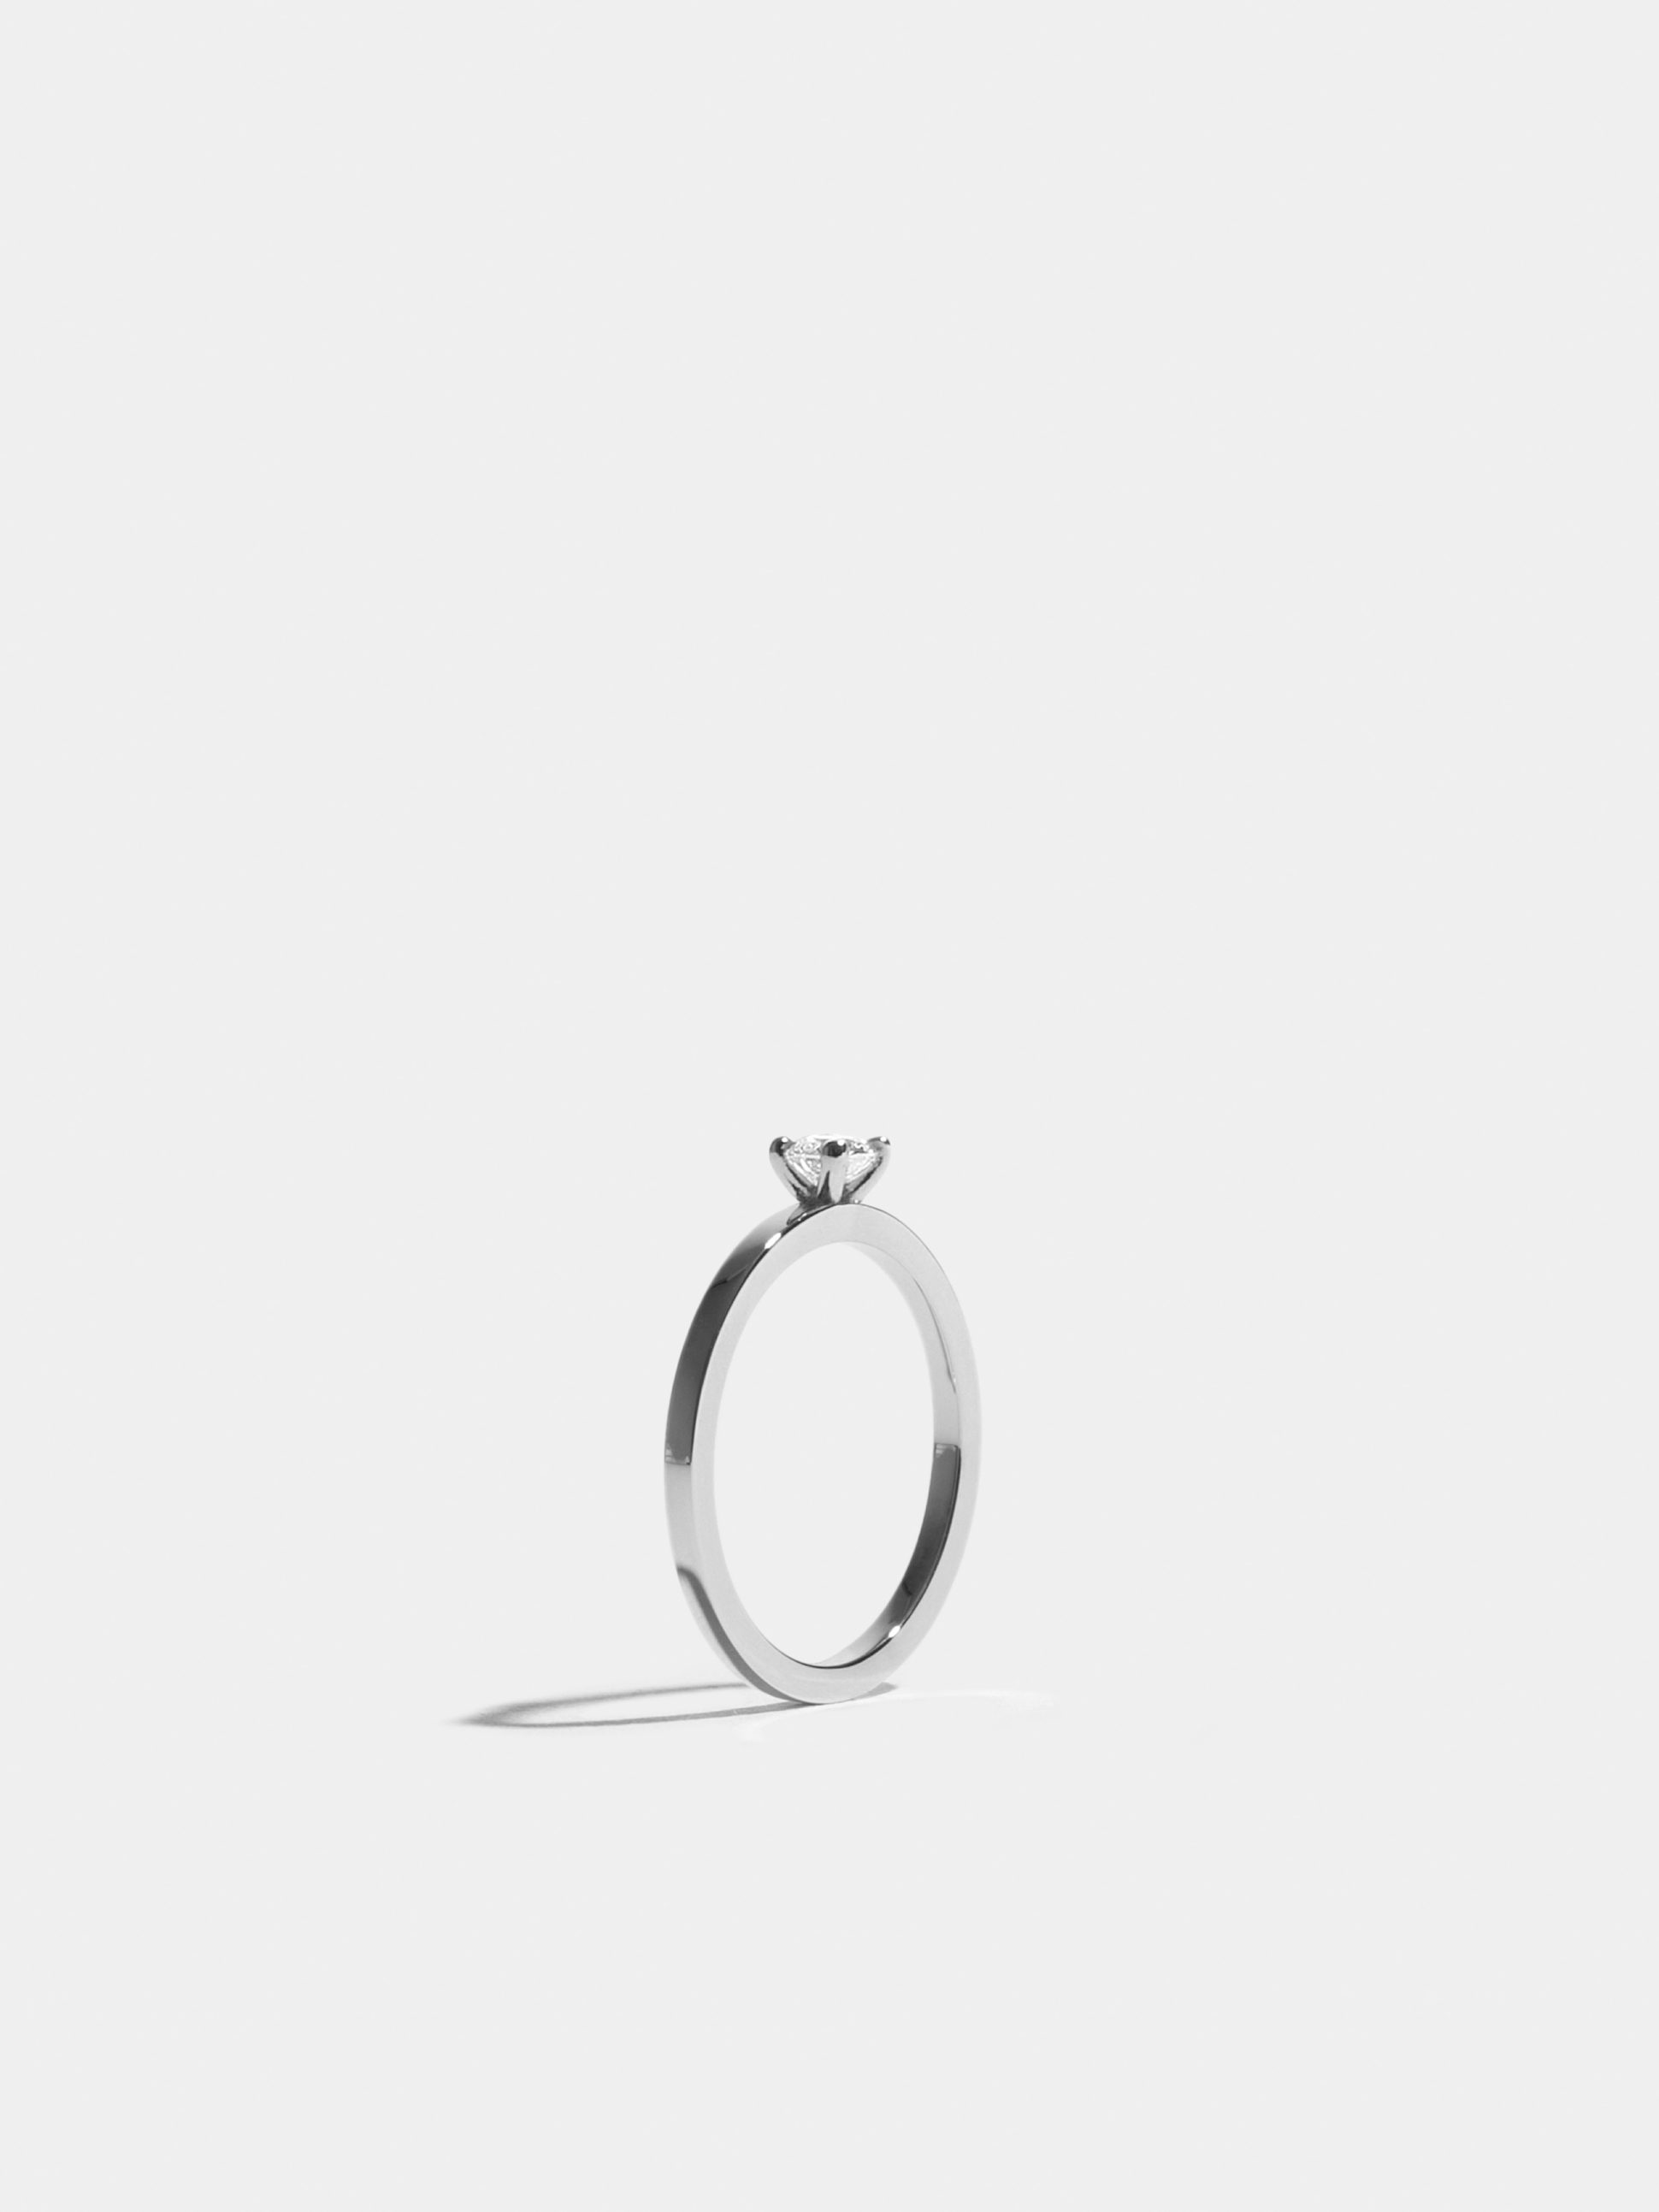 Solitaire Anagramme flat ribbon in white gold 18k Fairmined ethical set with a 0.30 carat brilliant cut synthetic diamond